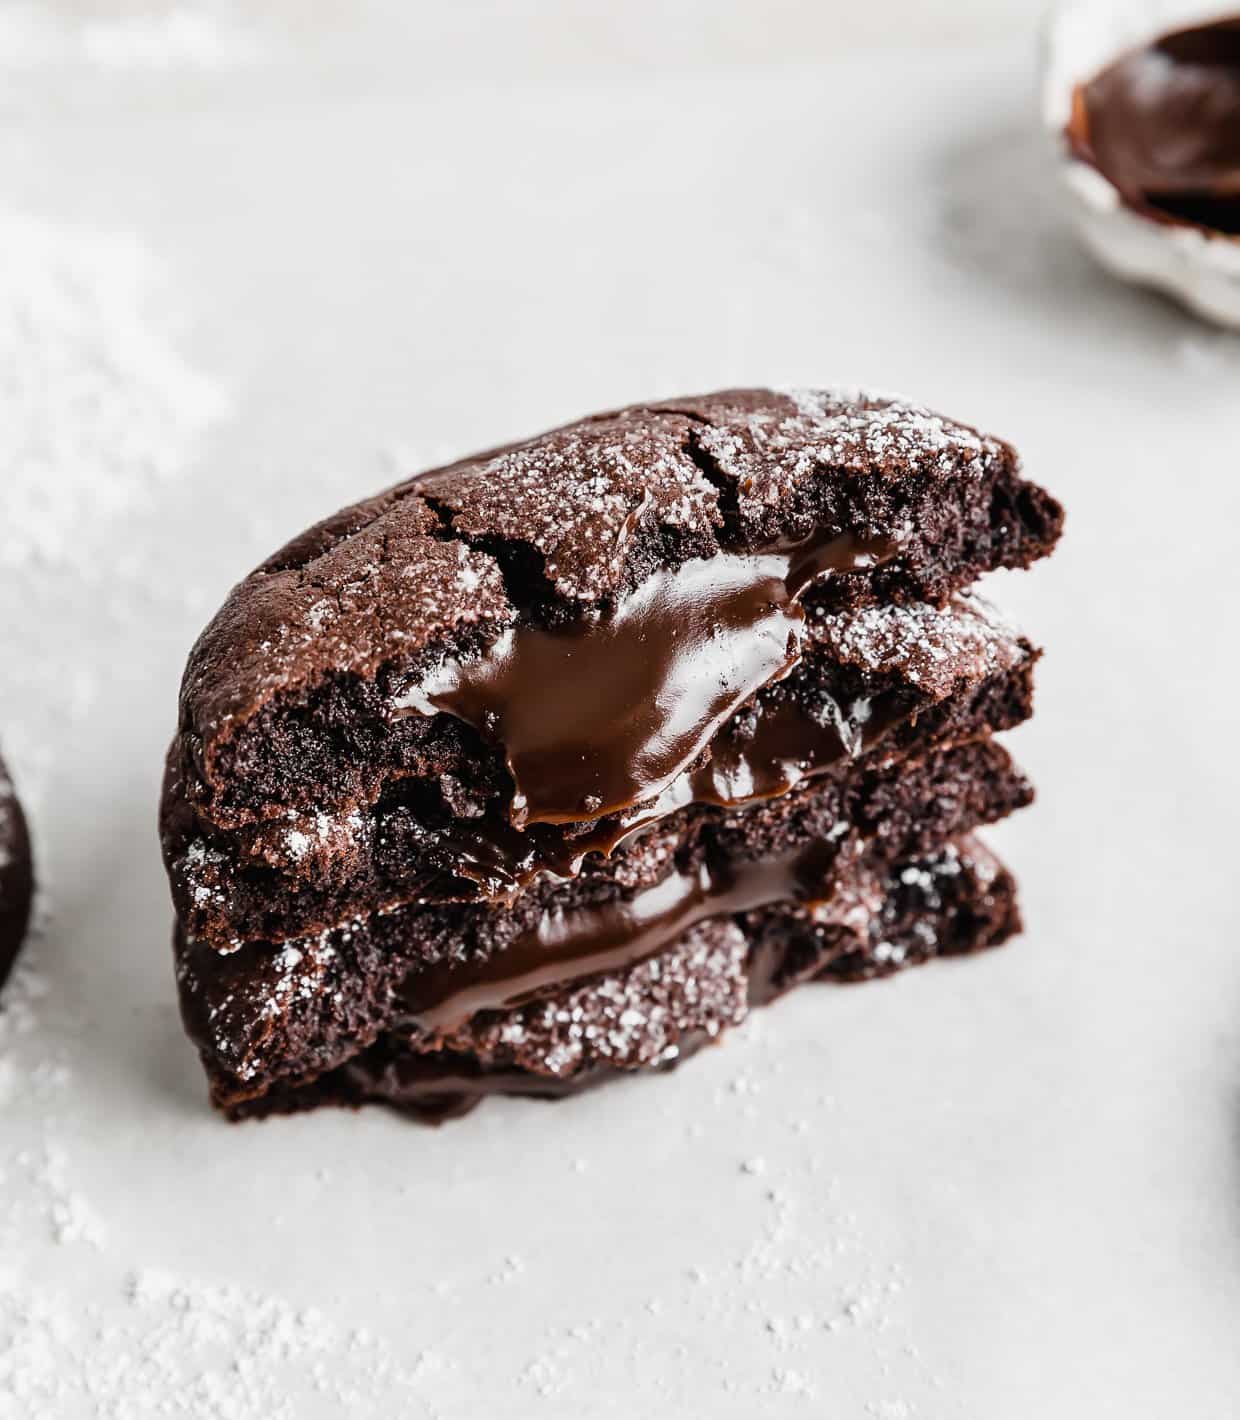 Copycat Crumbl molten lava cookies cut in half with hot fudge in the centers.